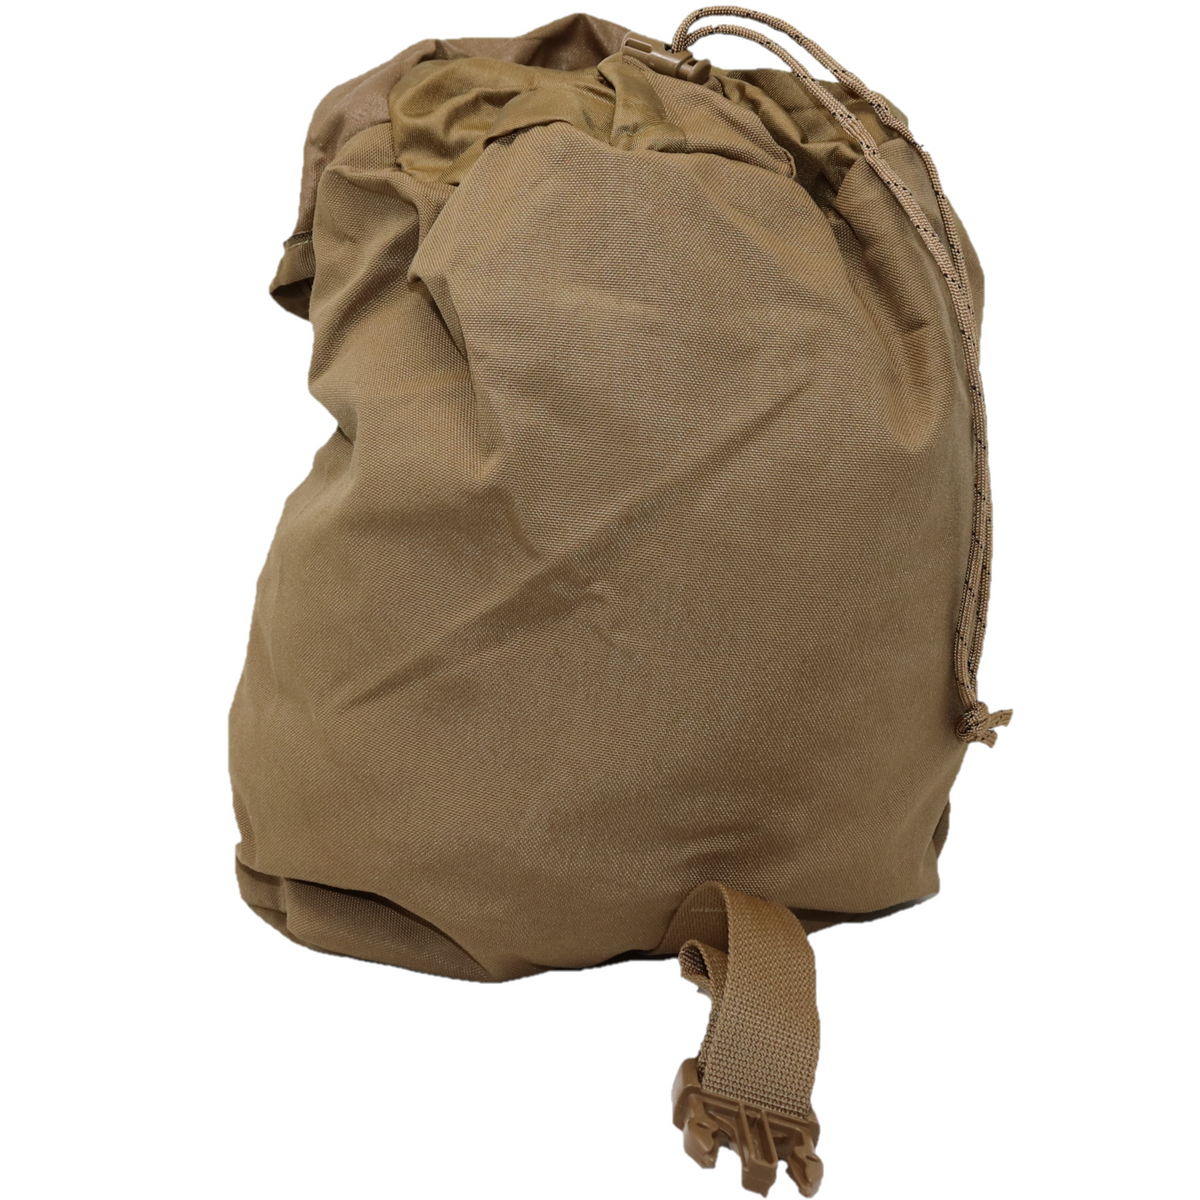 GI USMC FILBE Sustainment Pouch— Used